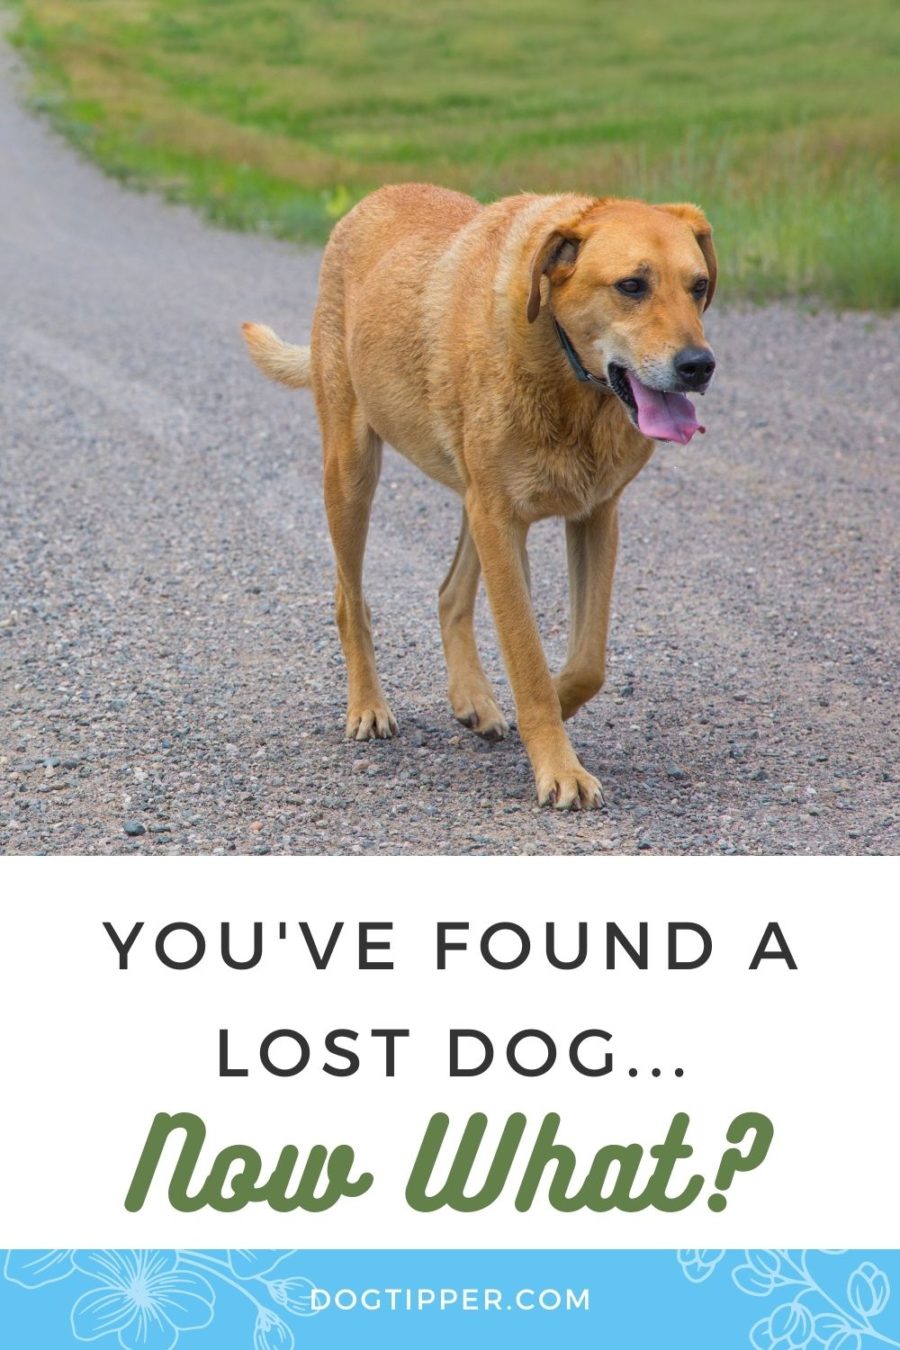 You've found a lost dog...now what?!